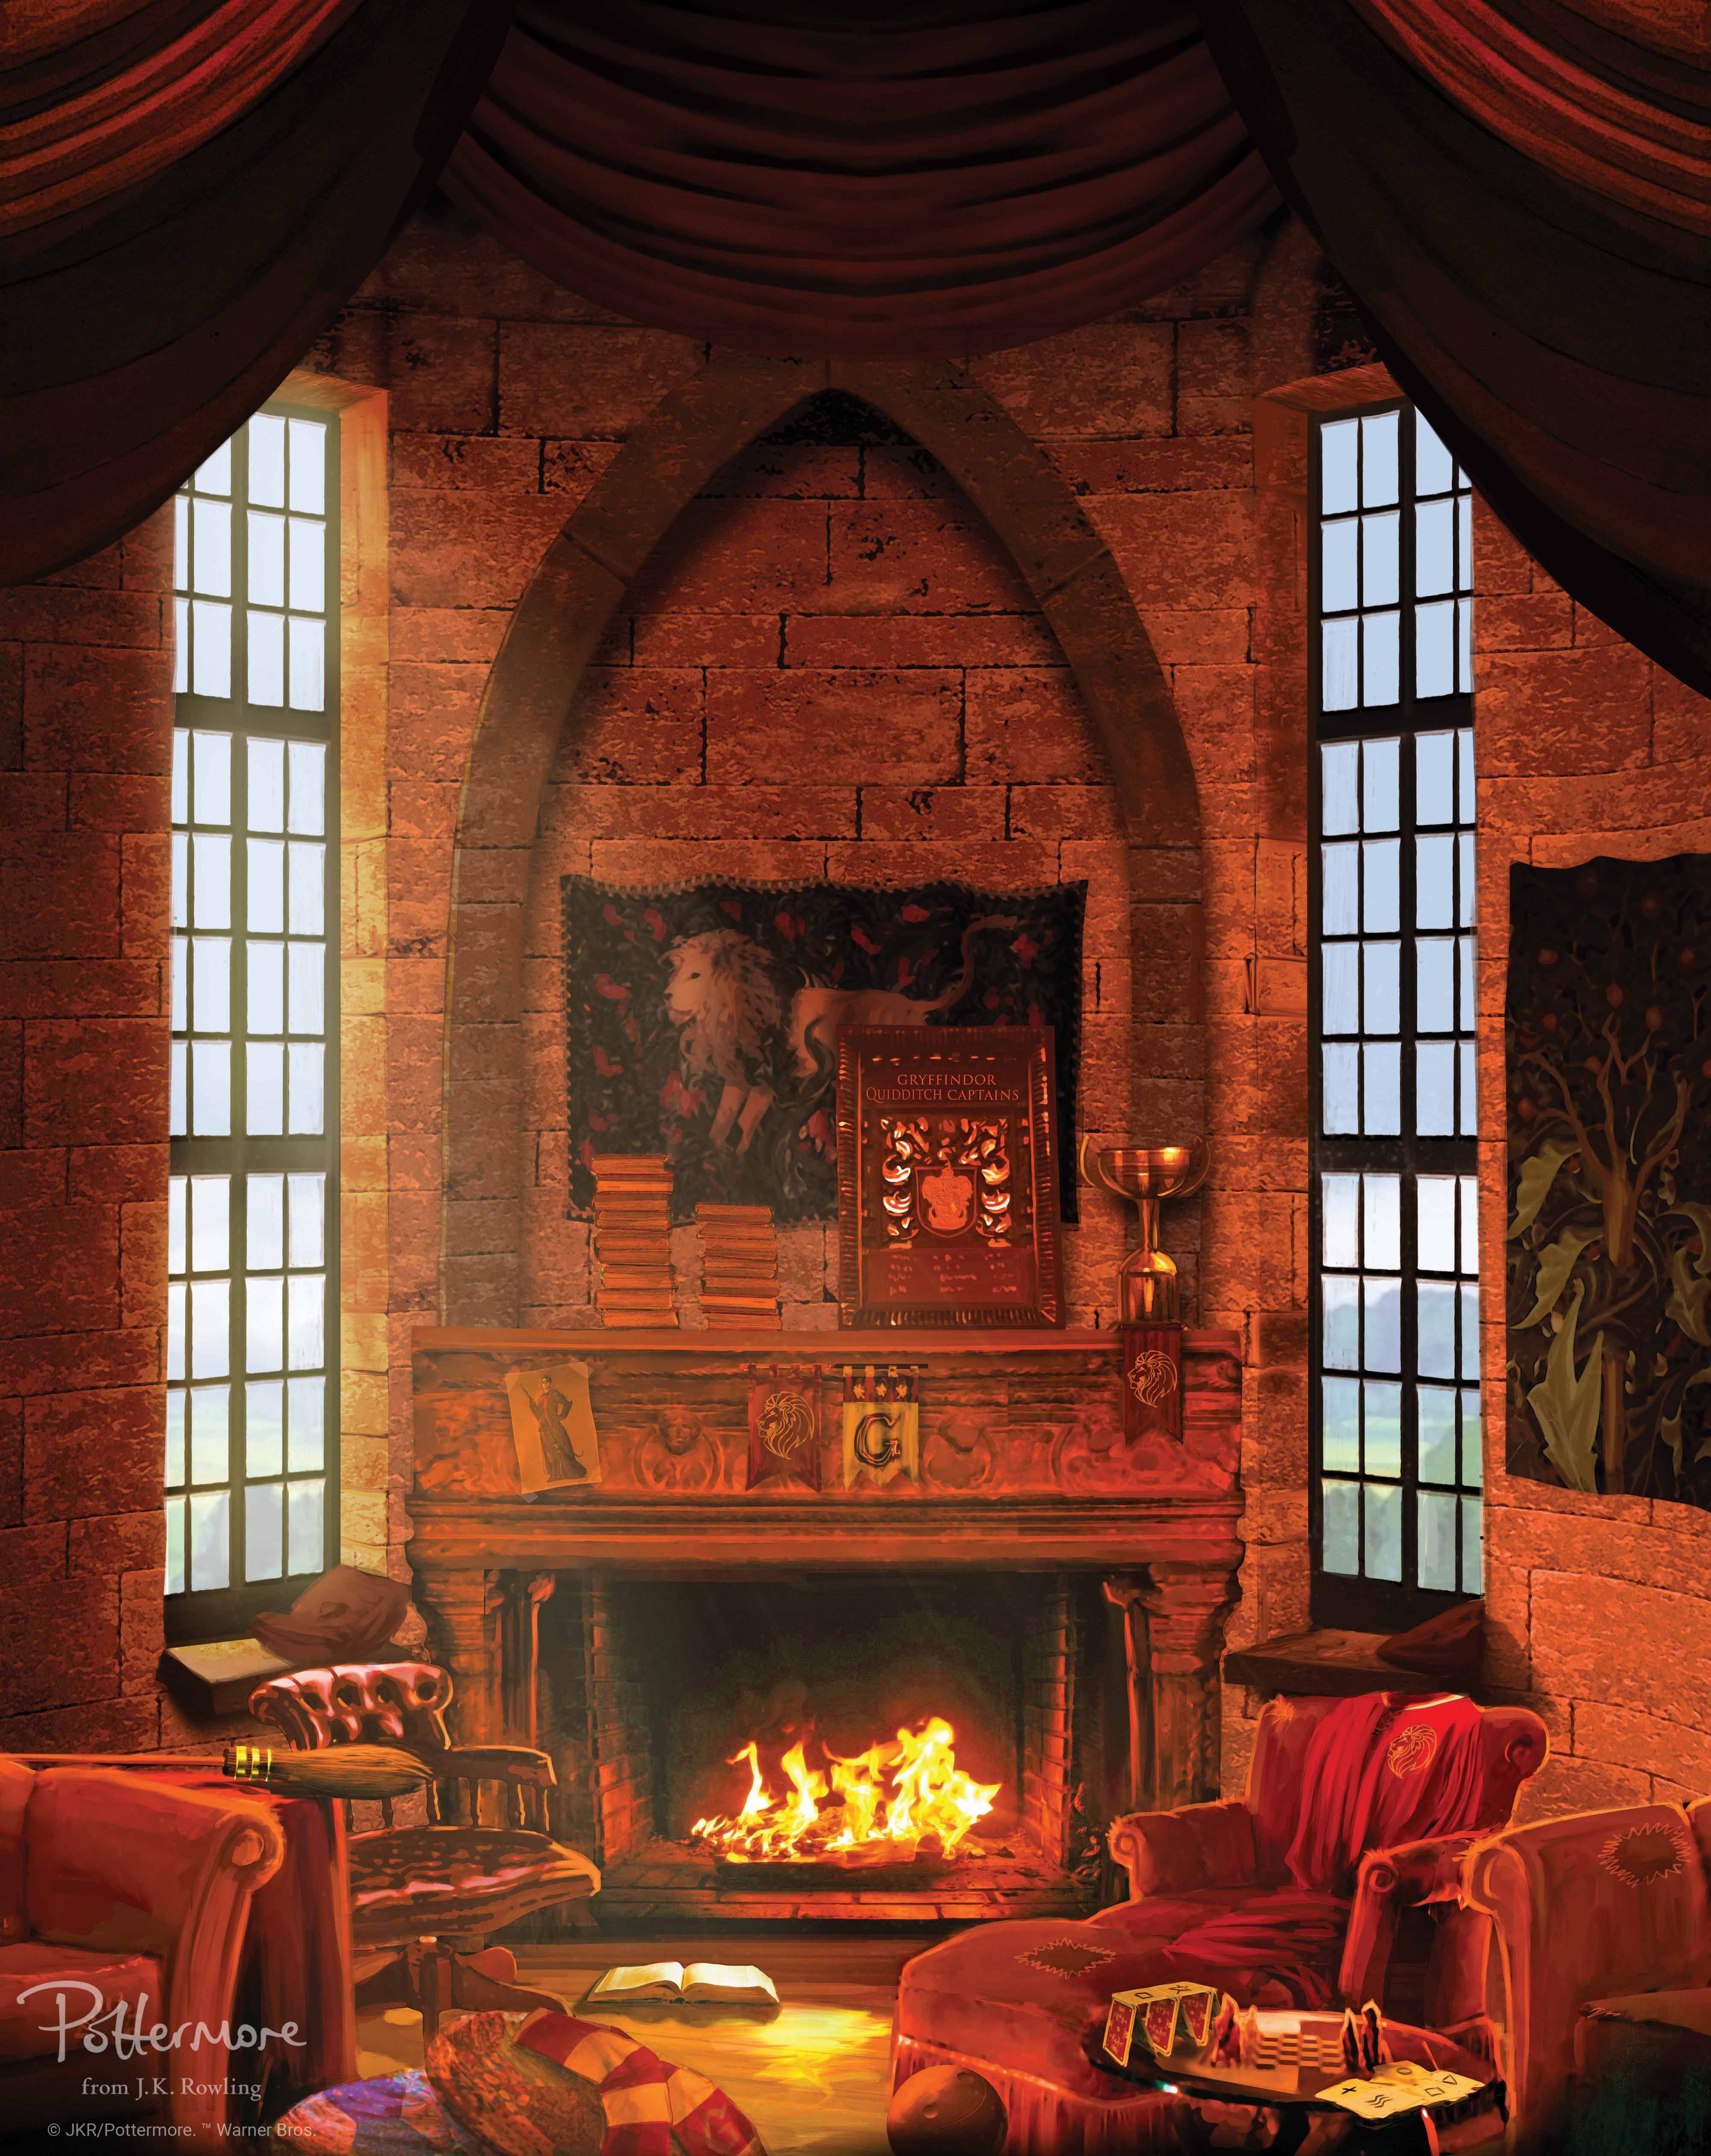 New Pottermore House Wallpaper. Gryffindor common room, Gryffindor, Harry potter image